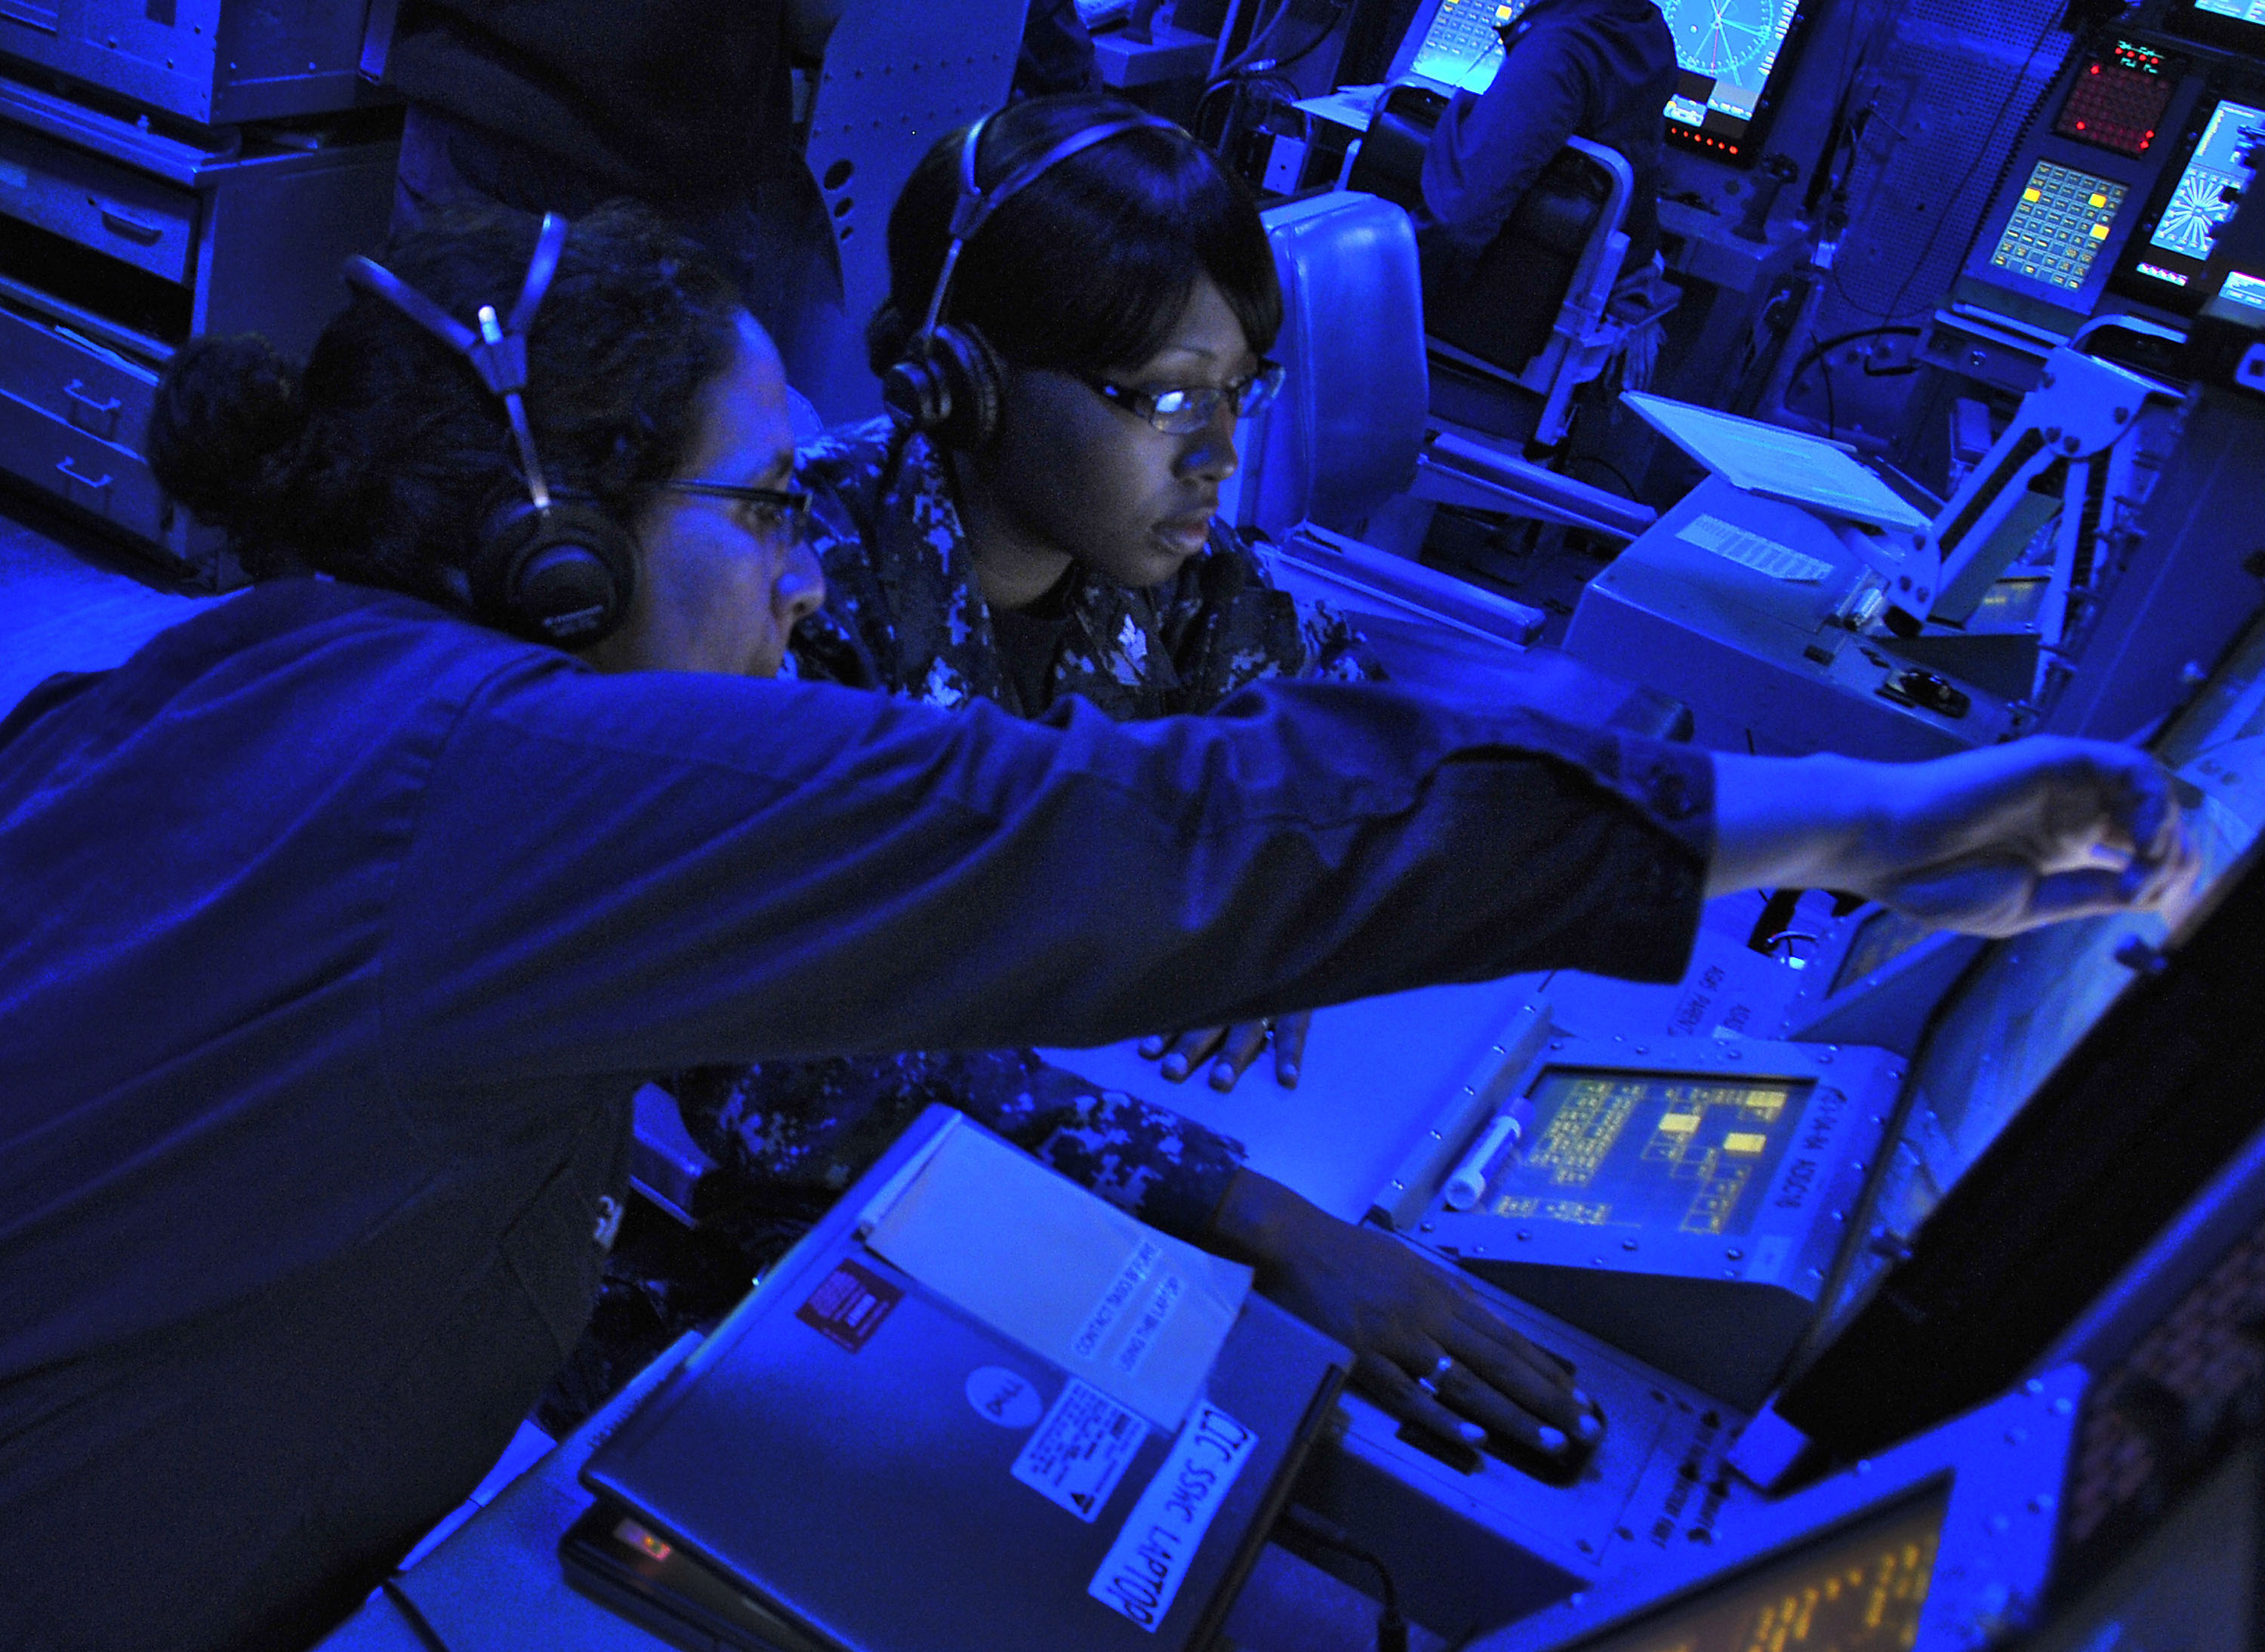 This is an image of sonar technicians.